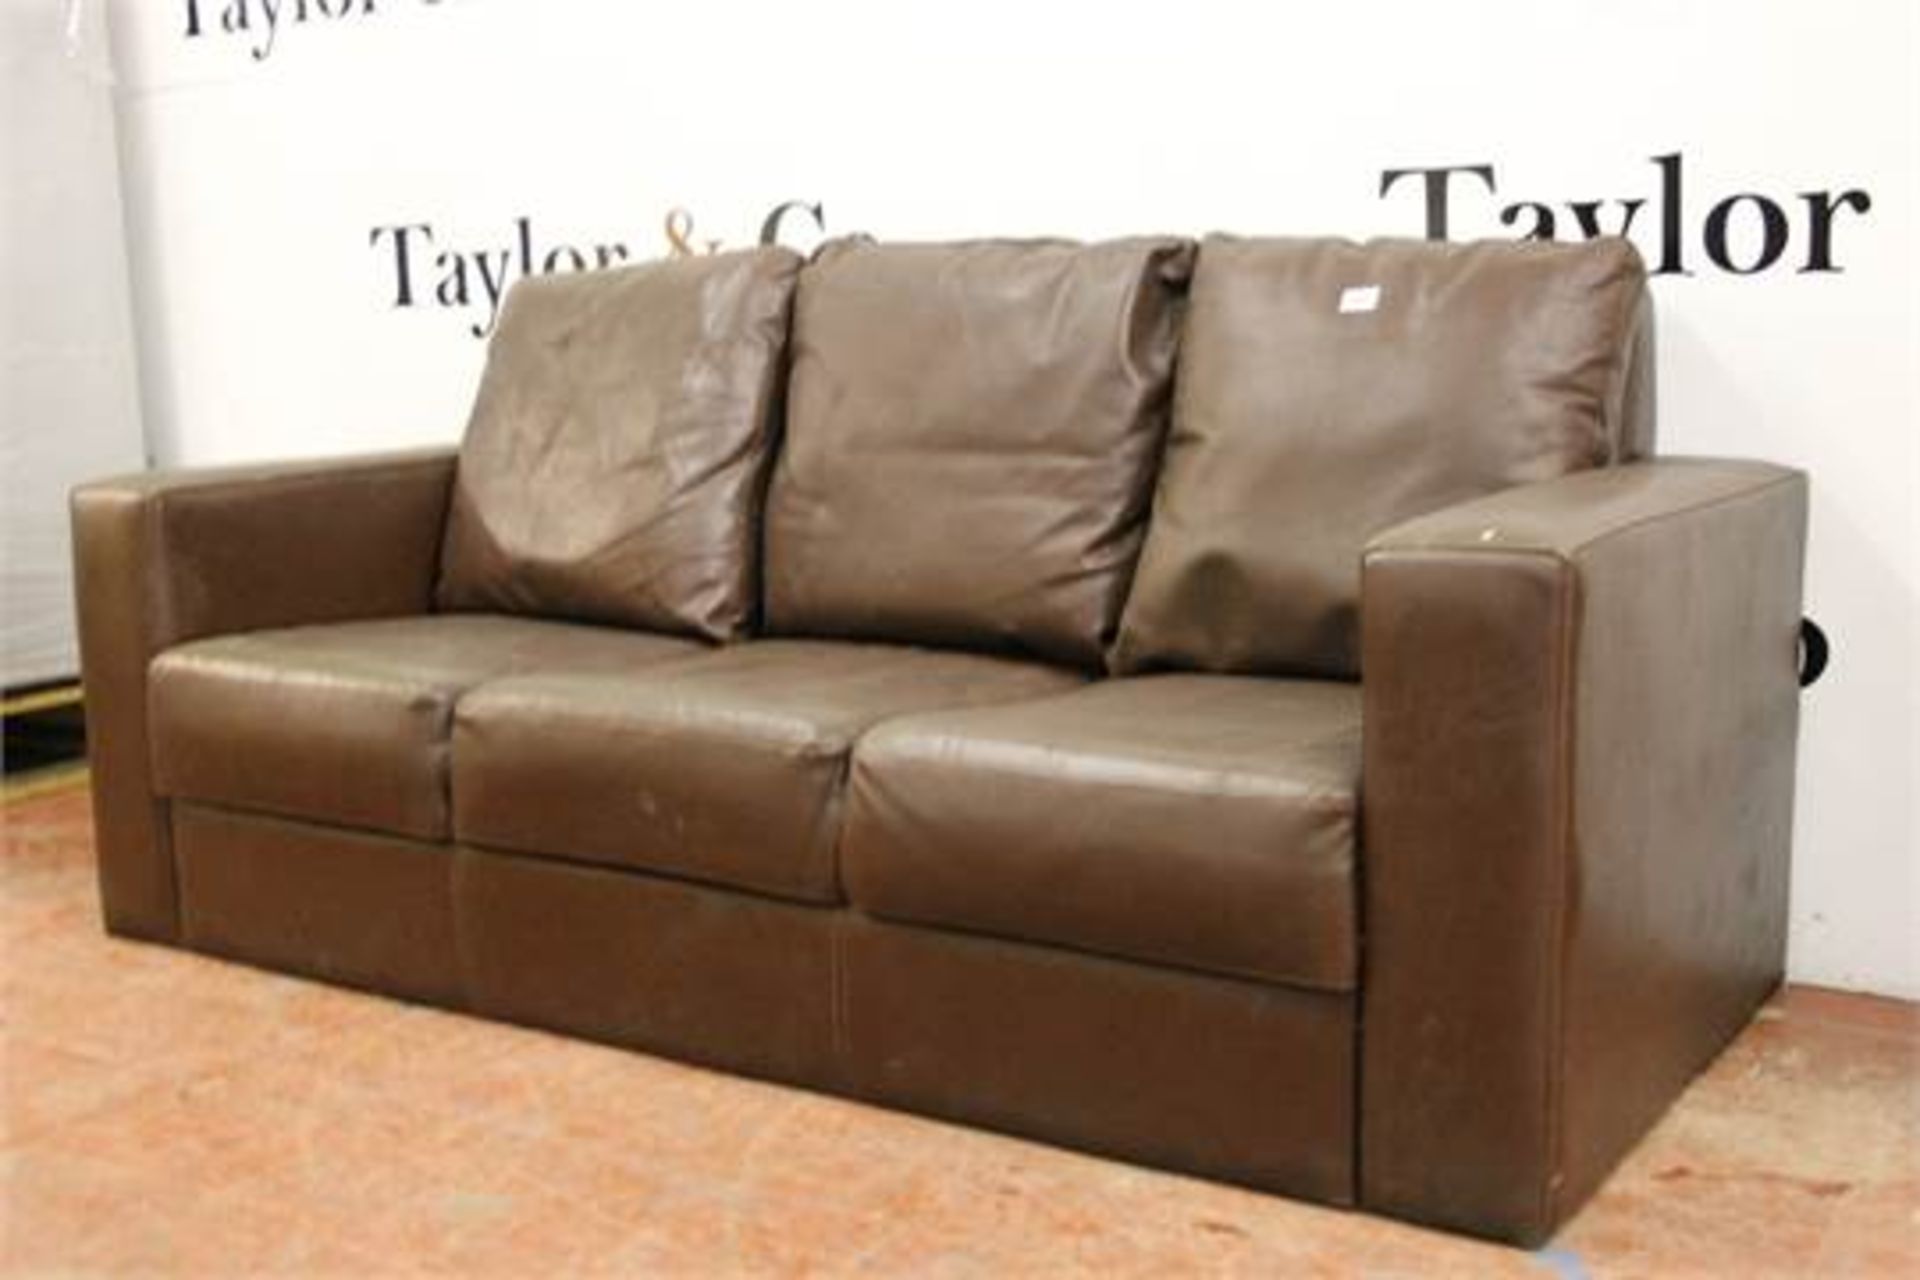 Large 3 Seater Brown Leather Sofa